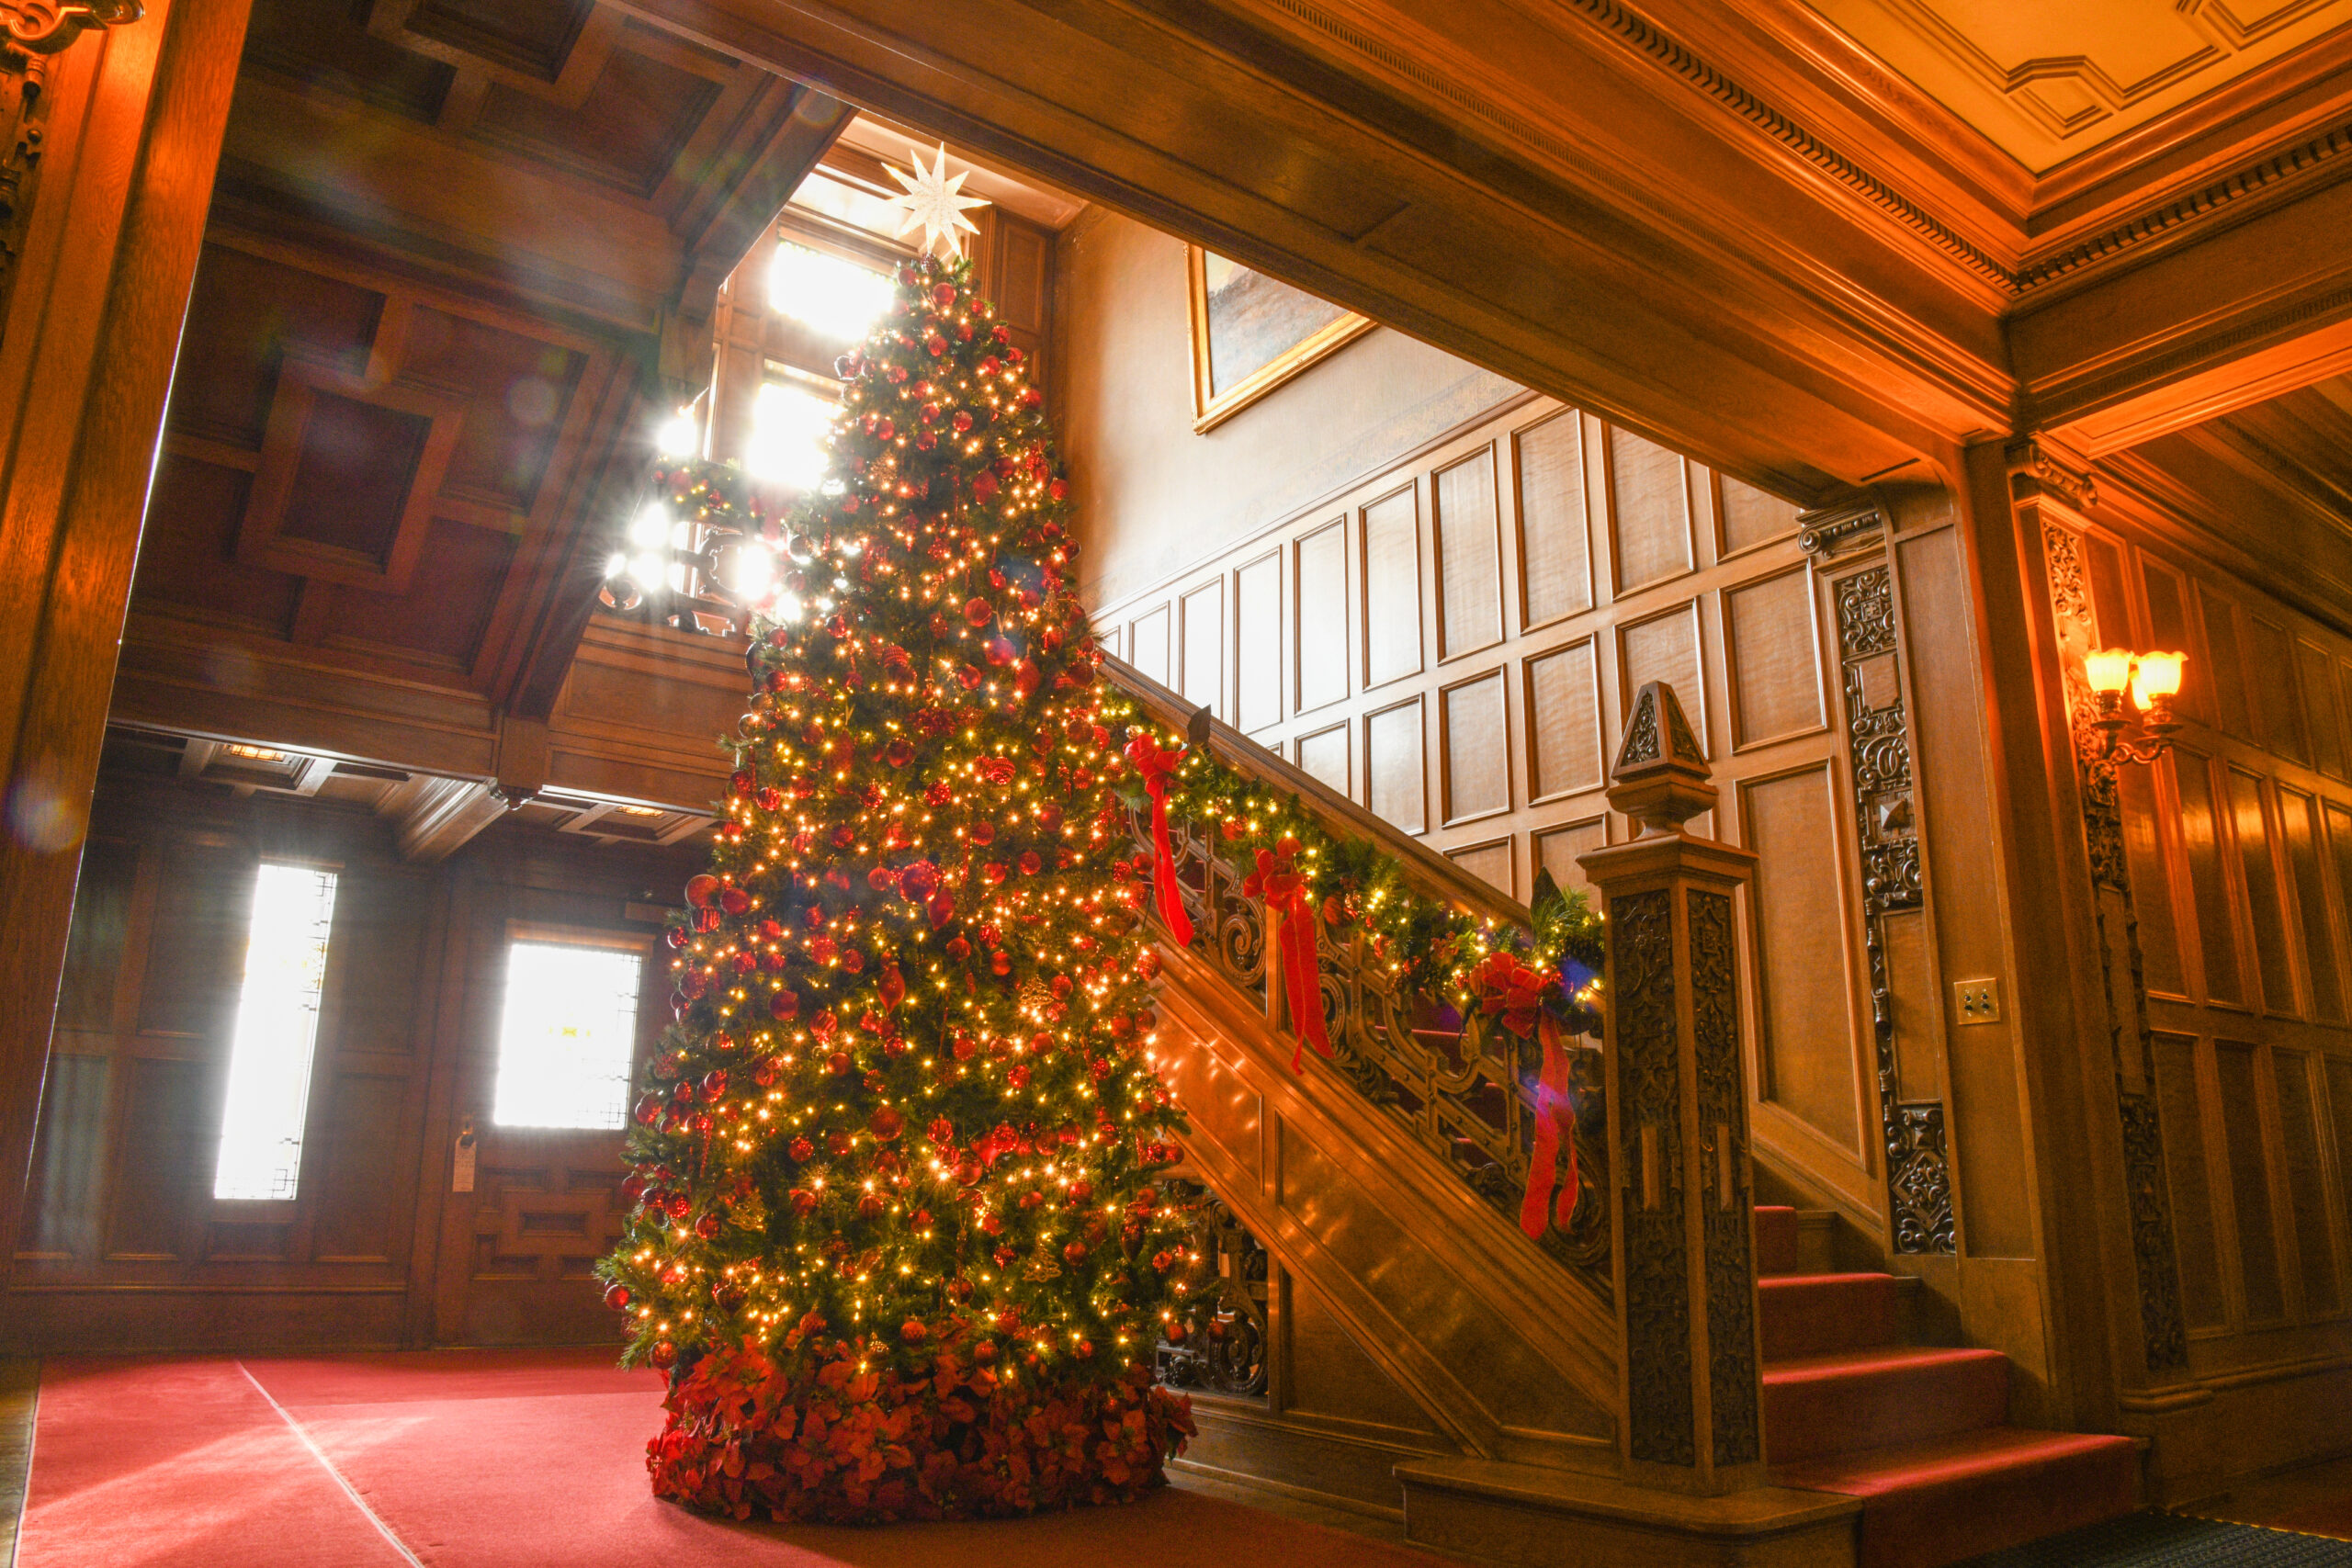 A large Christmas Tree stands in front of a staircase with a large wooden banister strung with garland and swag. The tree is in front of several large glass windows and is lit with white lights and red ribbon.